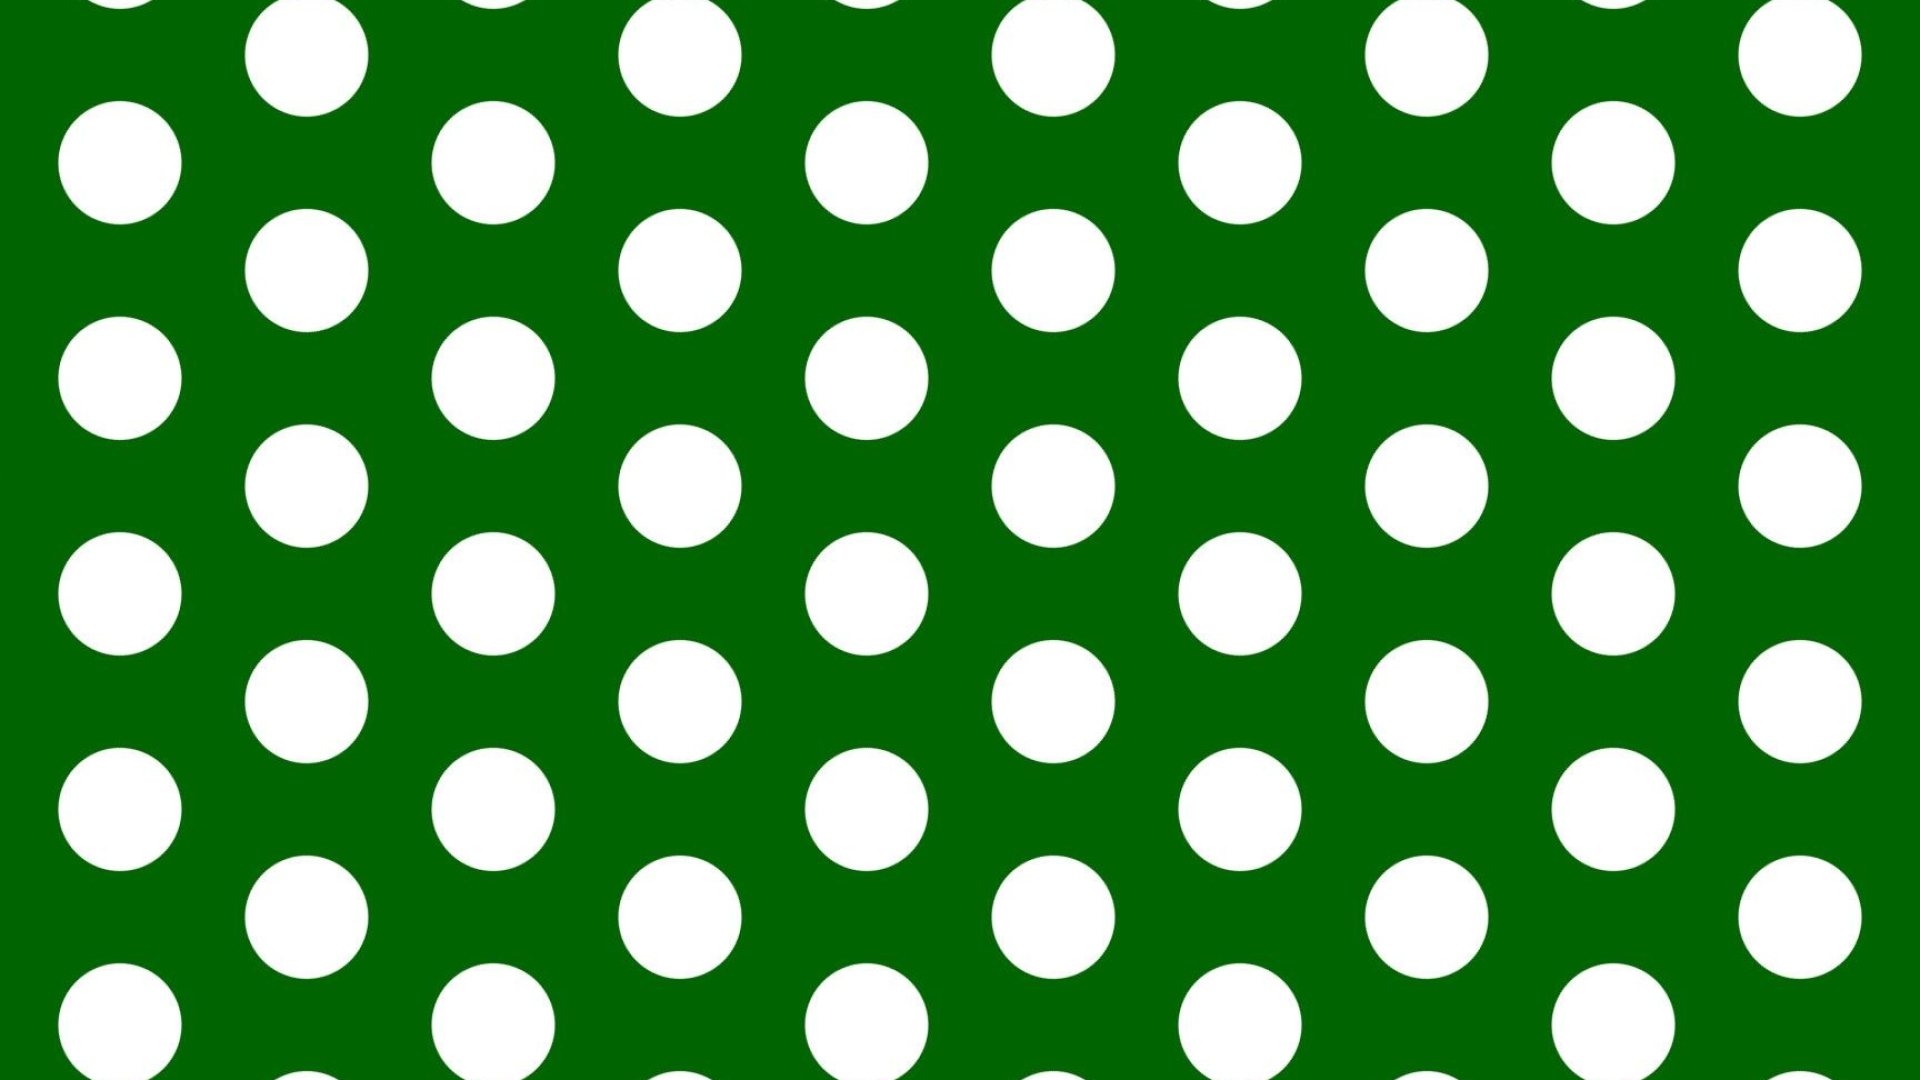 Polka Dot, Green accents, Refreshing and lively, Nature-inspired, 1920x1080 Full HD Desktop